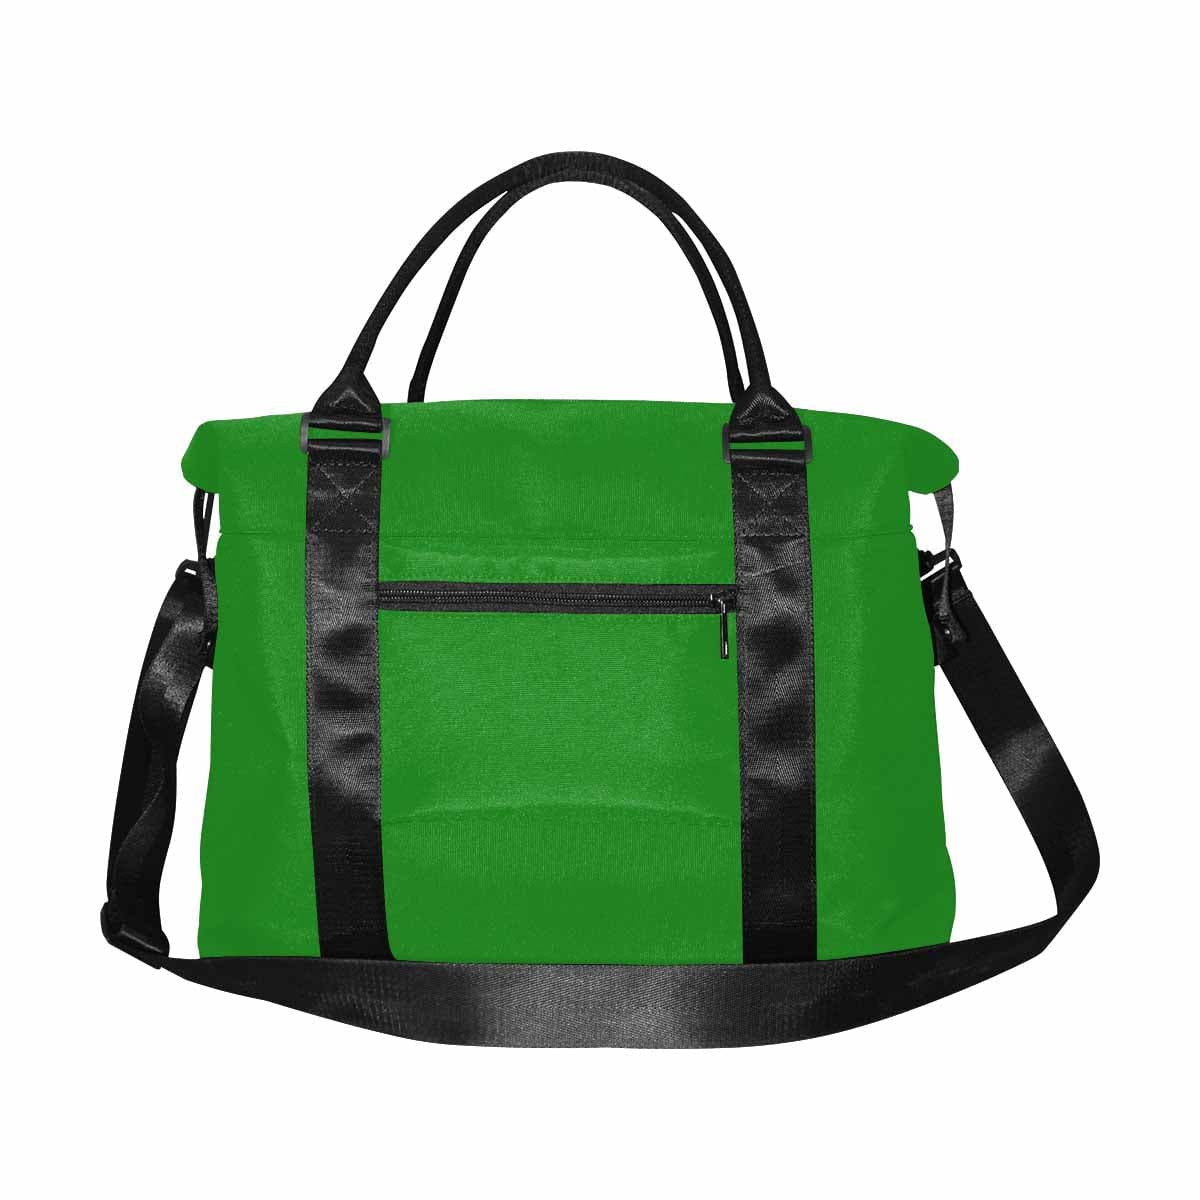 Forest Green Duffel Bag Large Travel Carry On - Bags | Duffel Bags